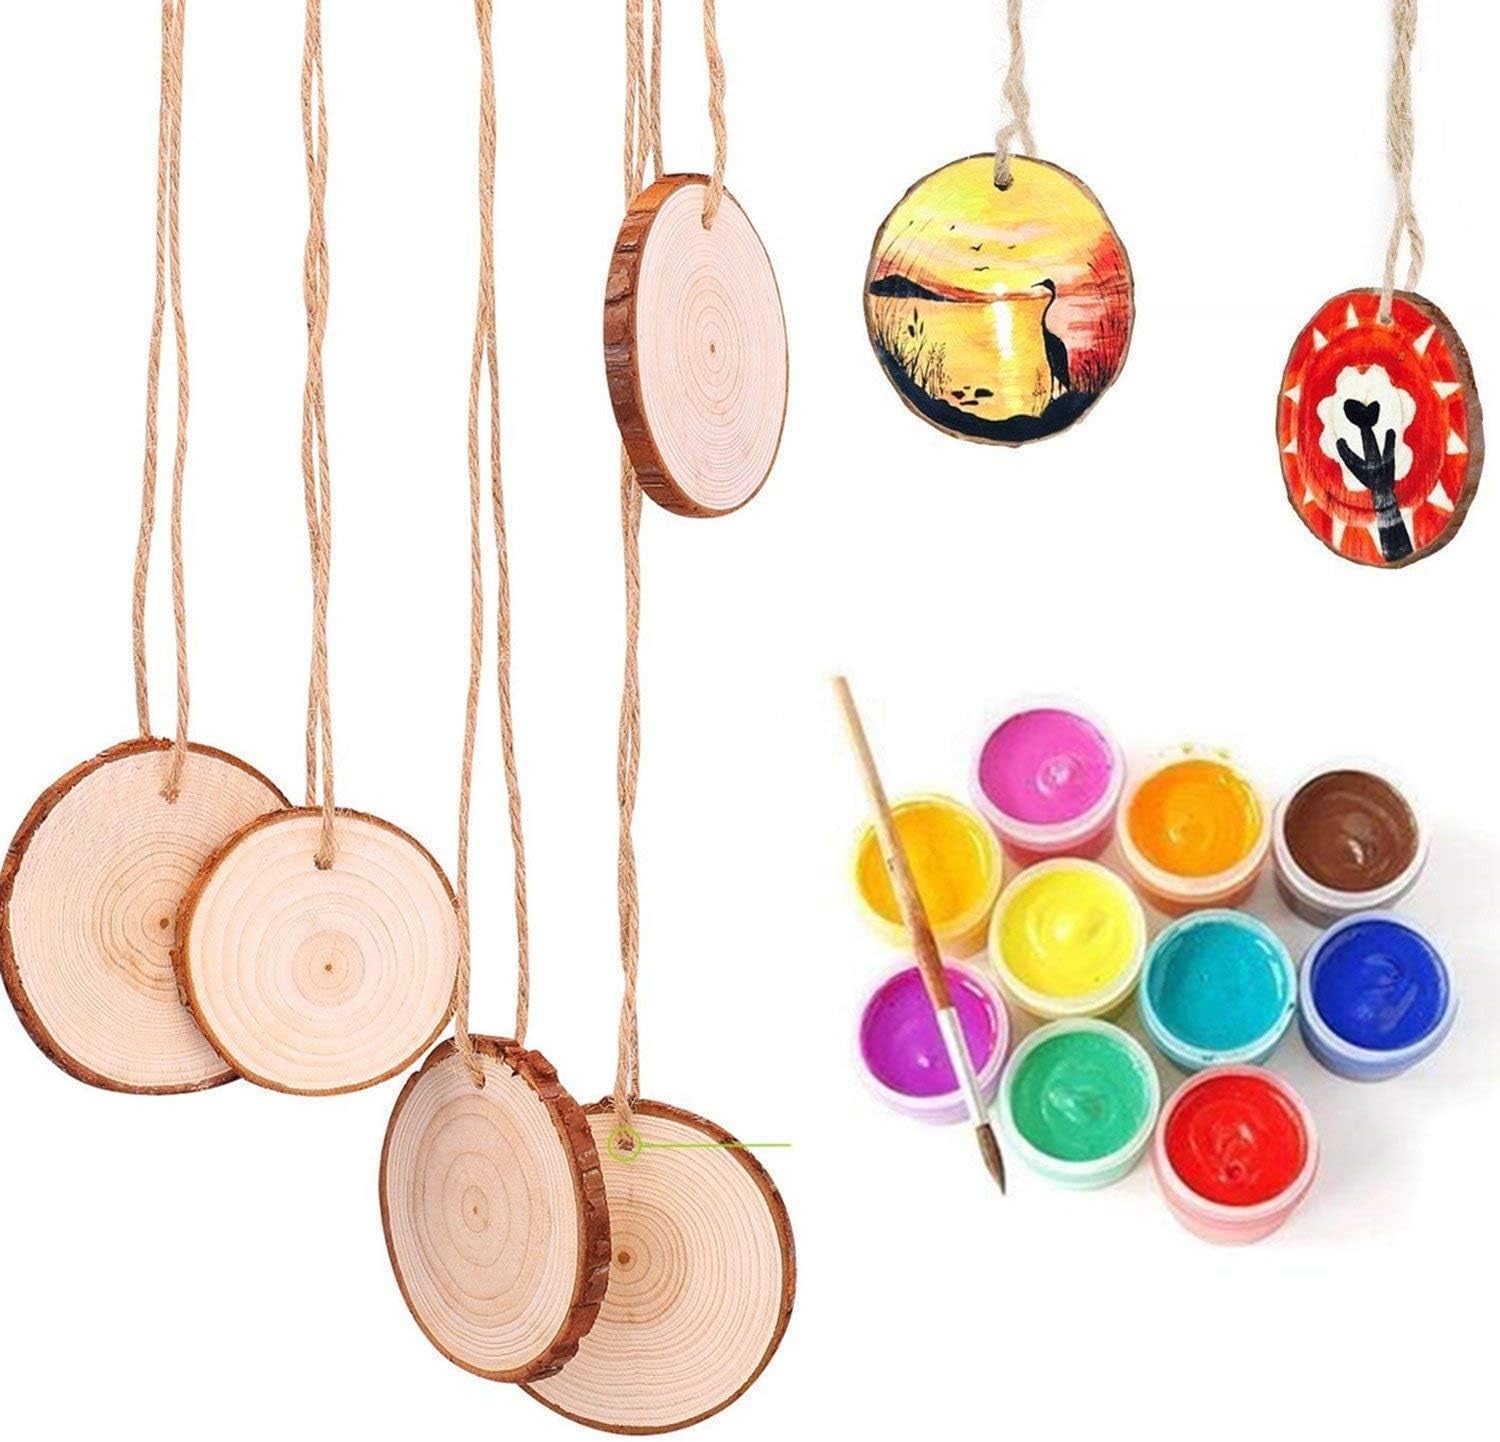 Wood Slices  Craft Unfinished Wood Kit Predrilled with Hole Wooden Circles for Arts Wood Slices Christmas Ornaments DIY Crafts 30 Pcs 2.7-3.1 Inches